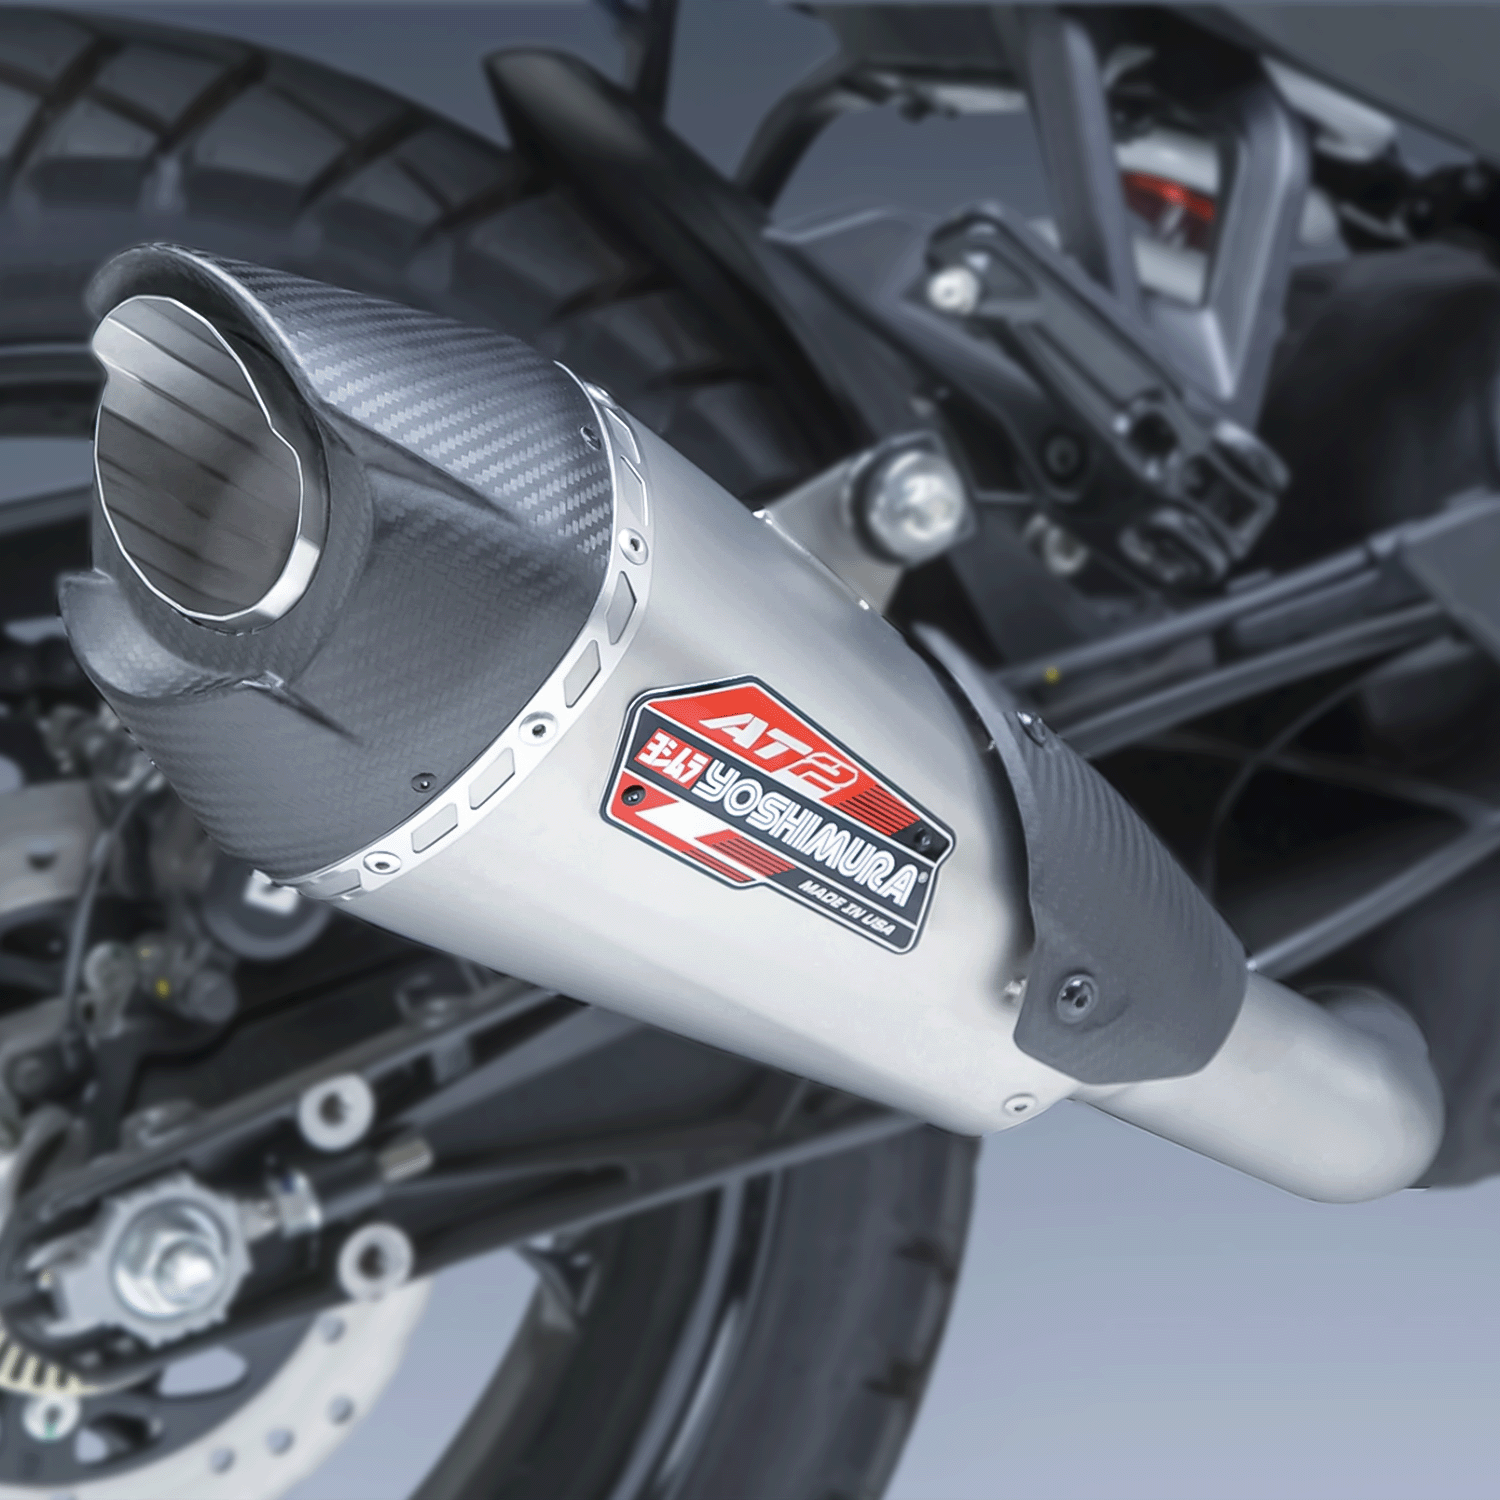 390 ADVENTURE 2020 AT2 Stainless Slip-On Exhaust, w/ Stainless Muffler